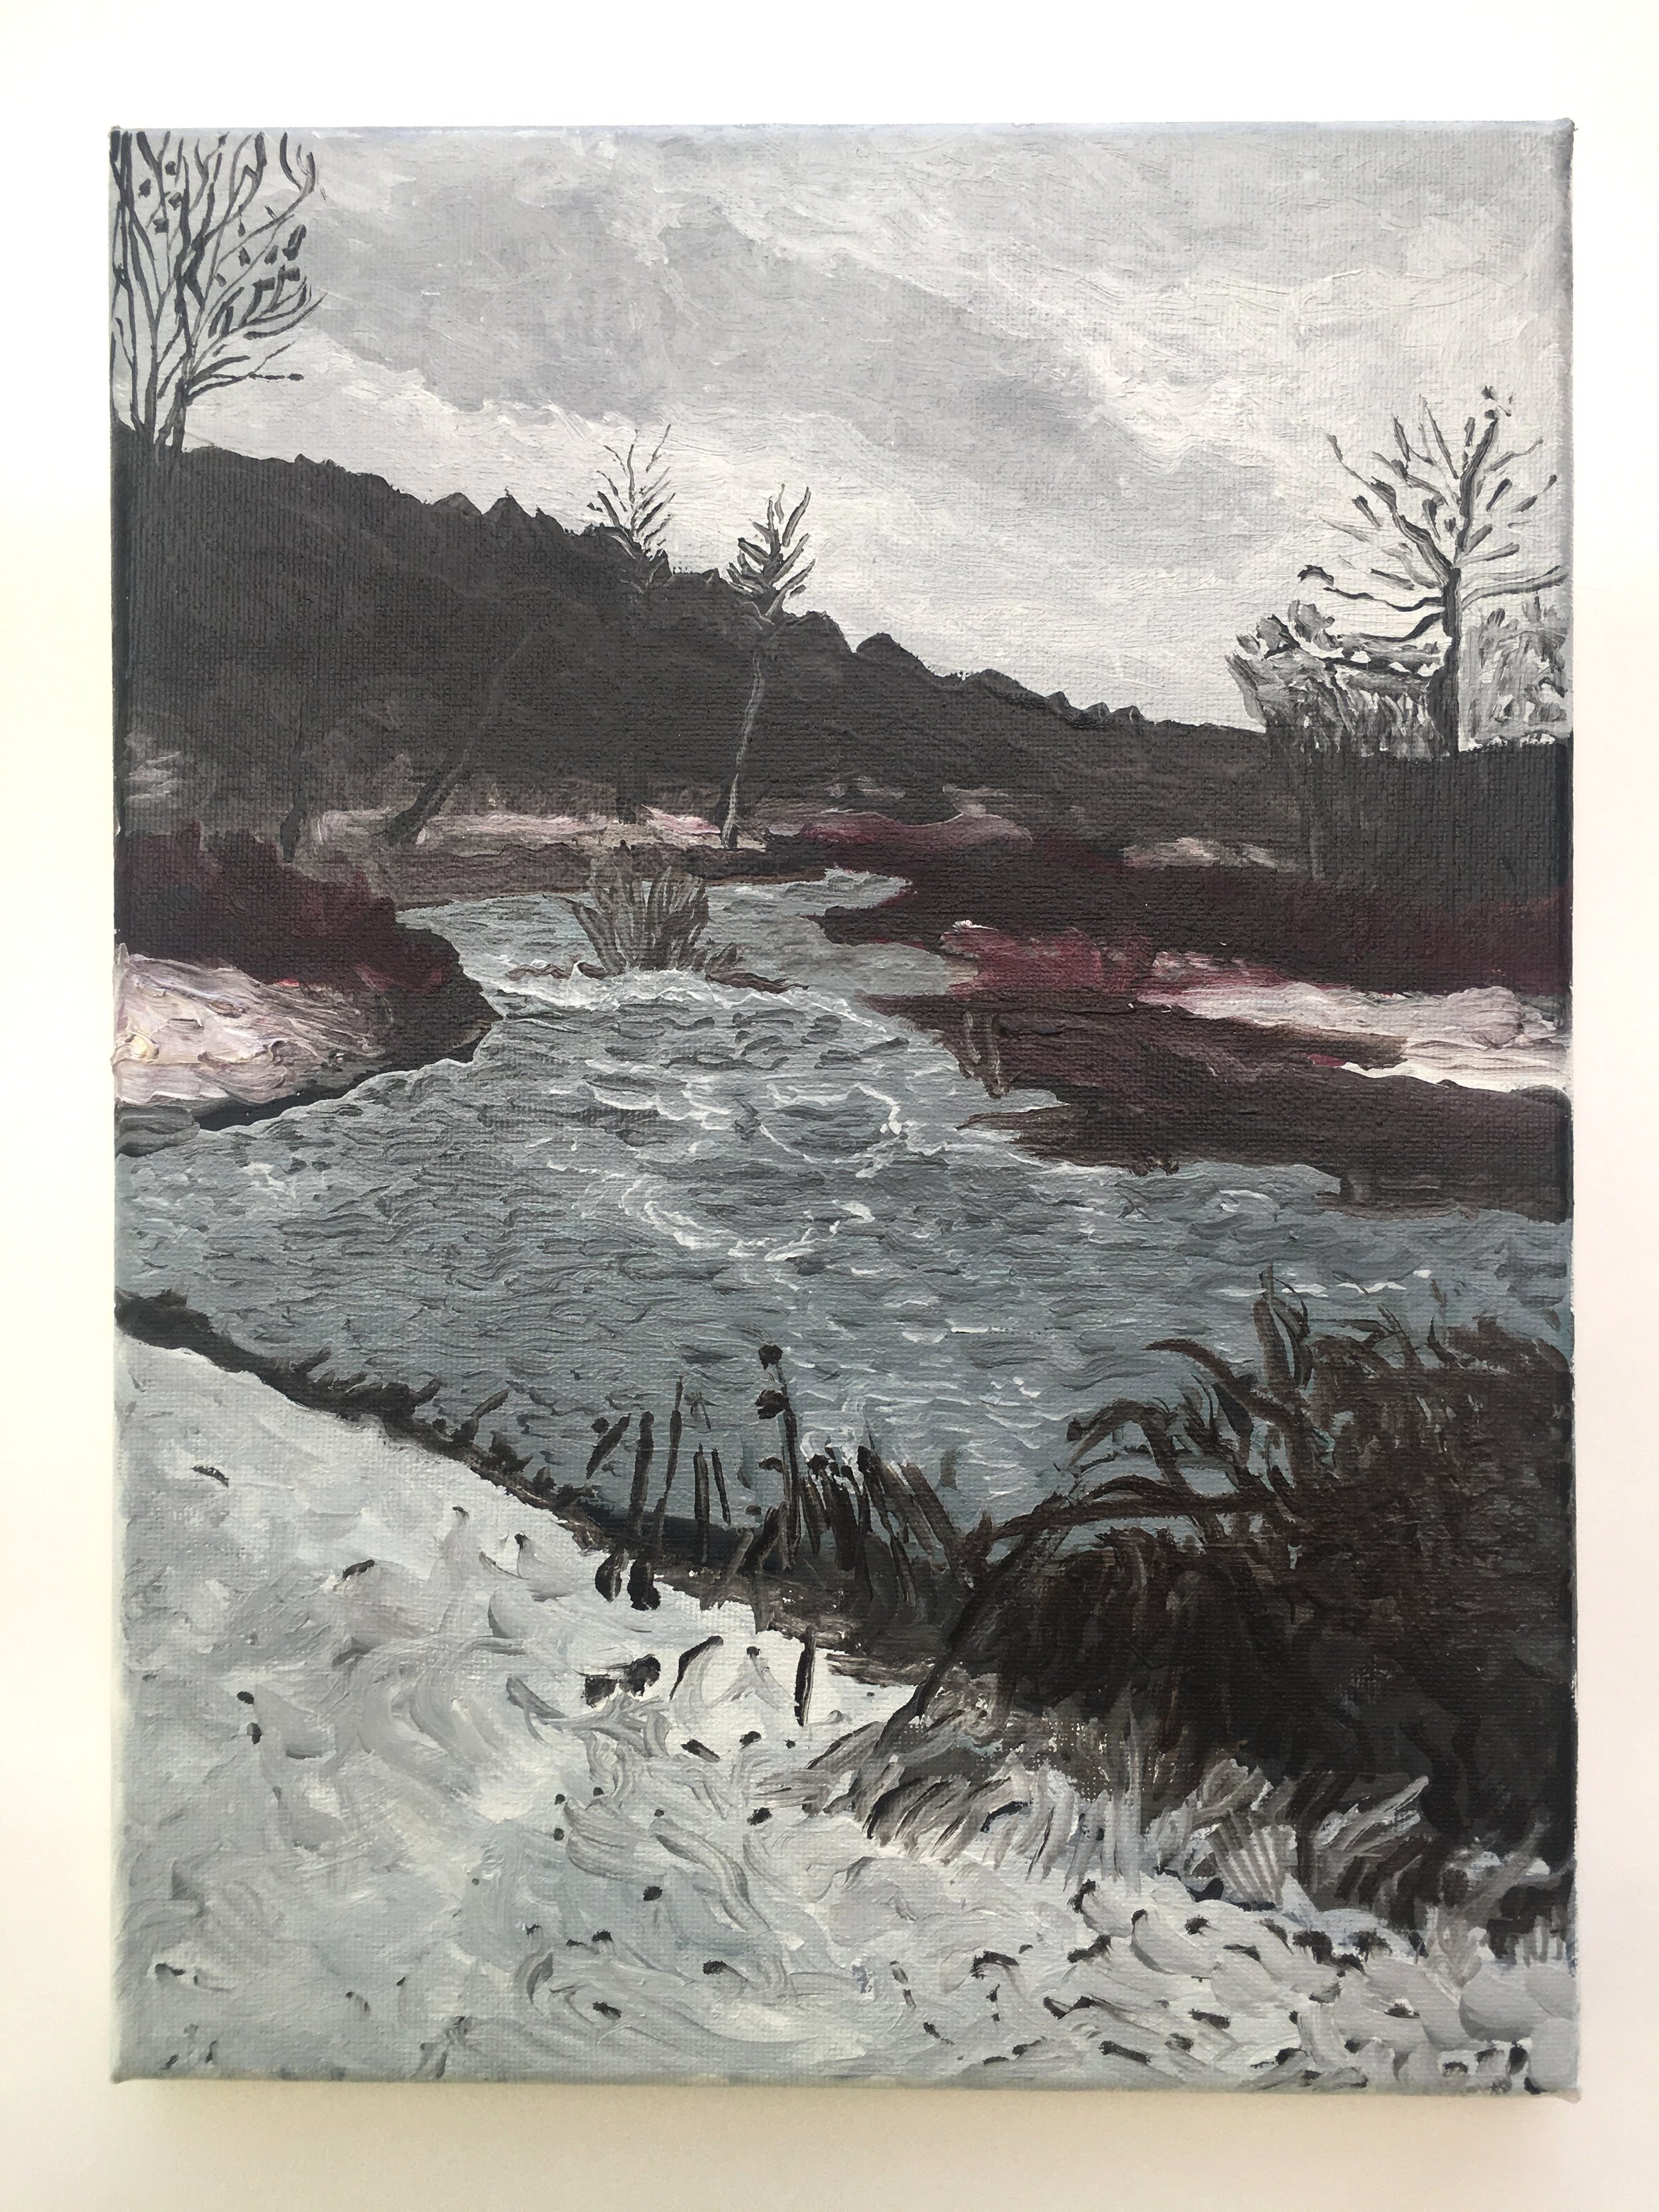   Snow Melt in the Creek,  Oil on Canvas, 12” x 9”, 2021 